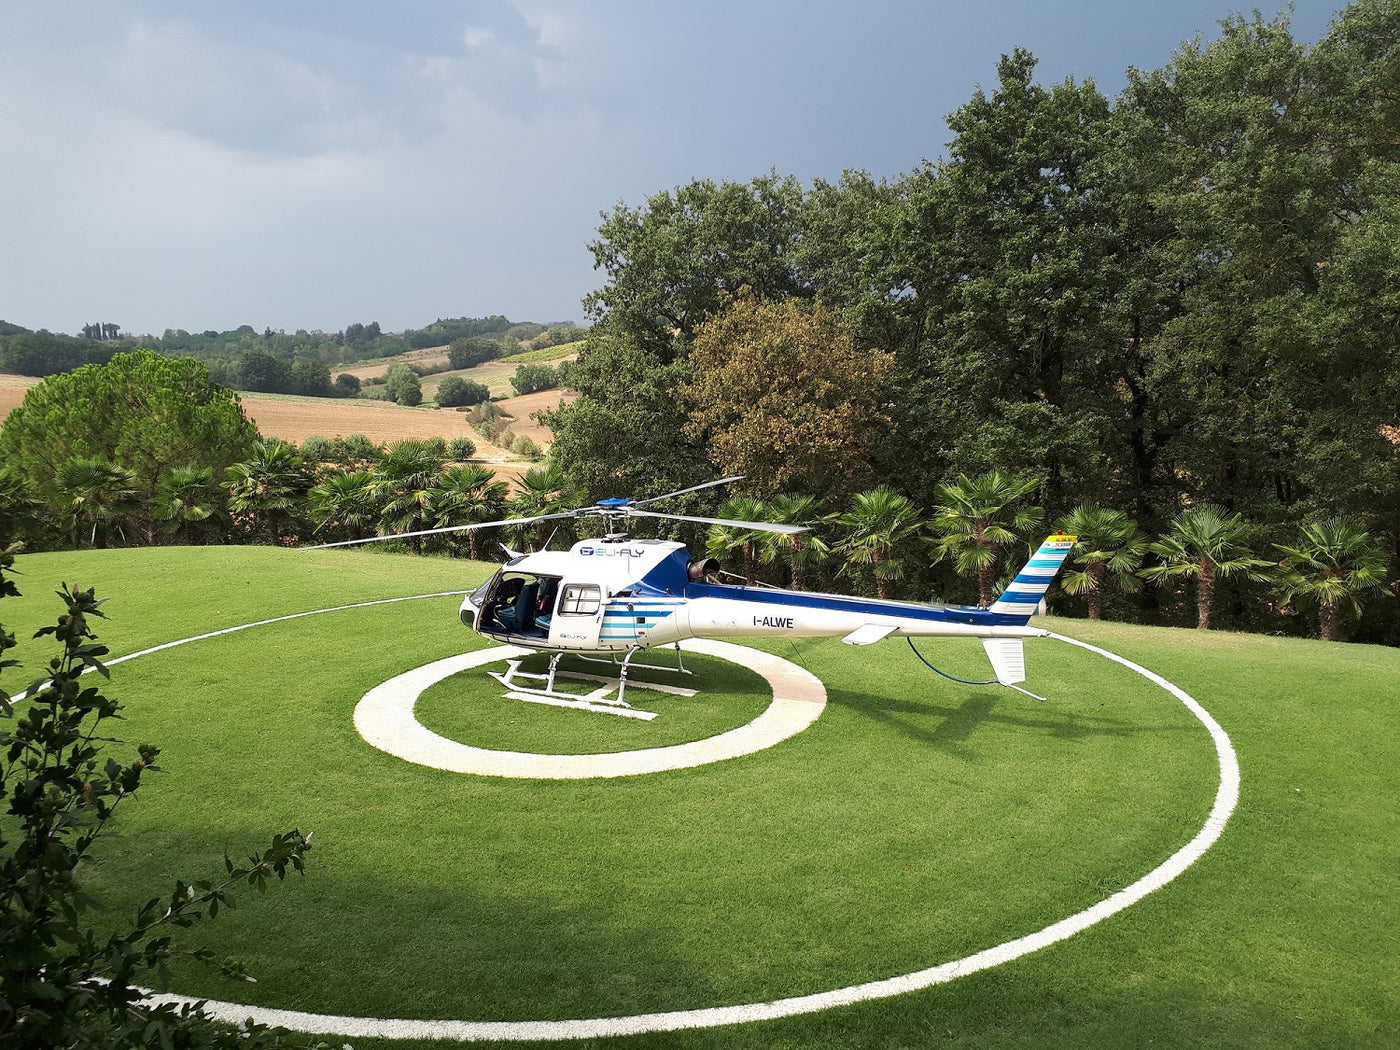 Helicopter disposal model AS350 helicopter MILANO Bresso airport to Cinquale airport LILQ